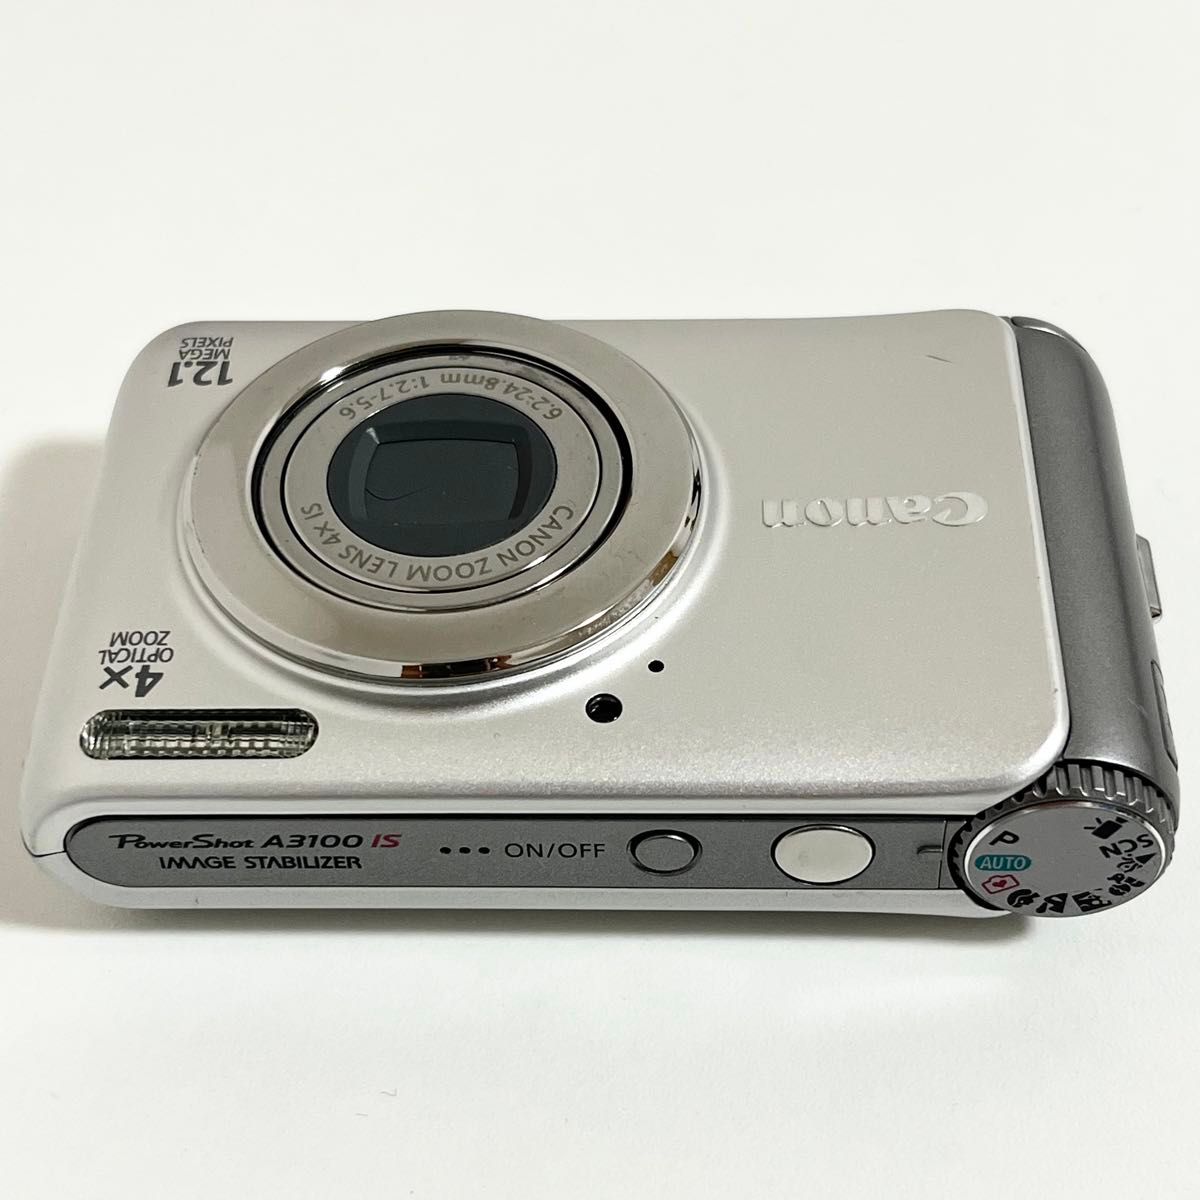 Canon powershot A3100IS